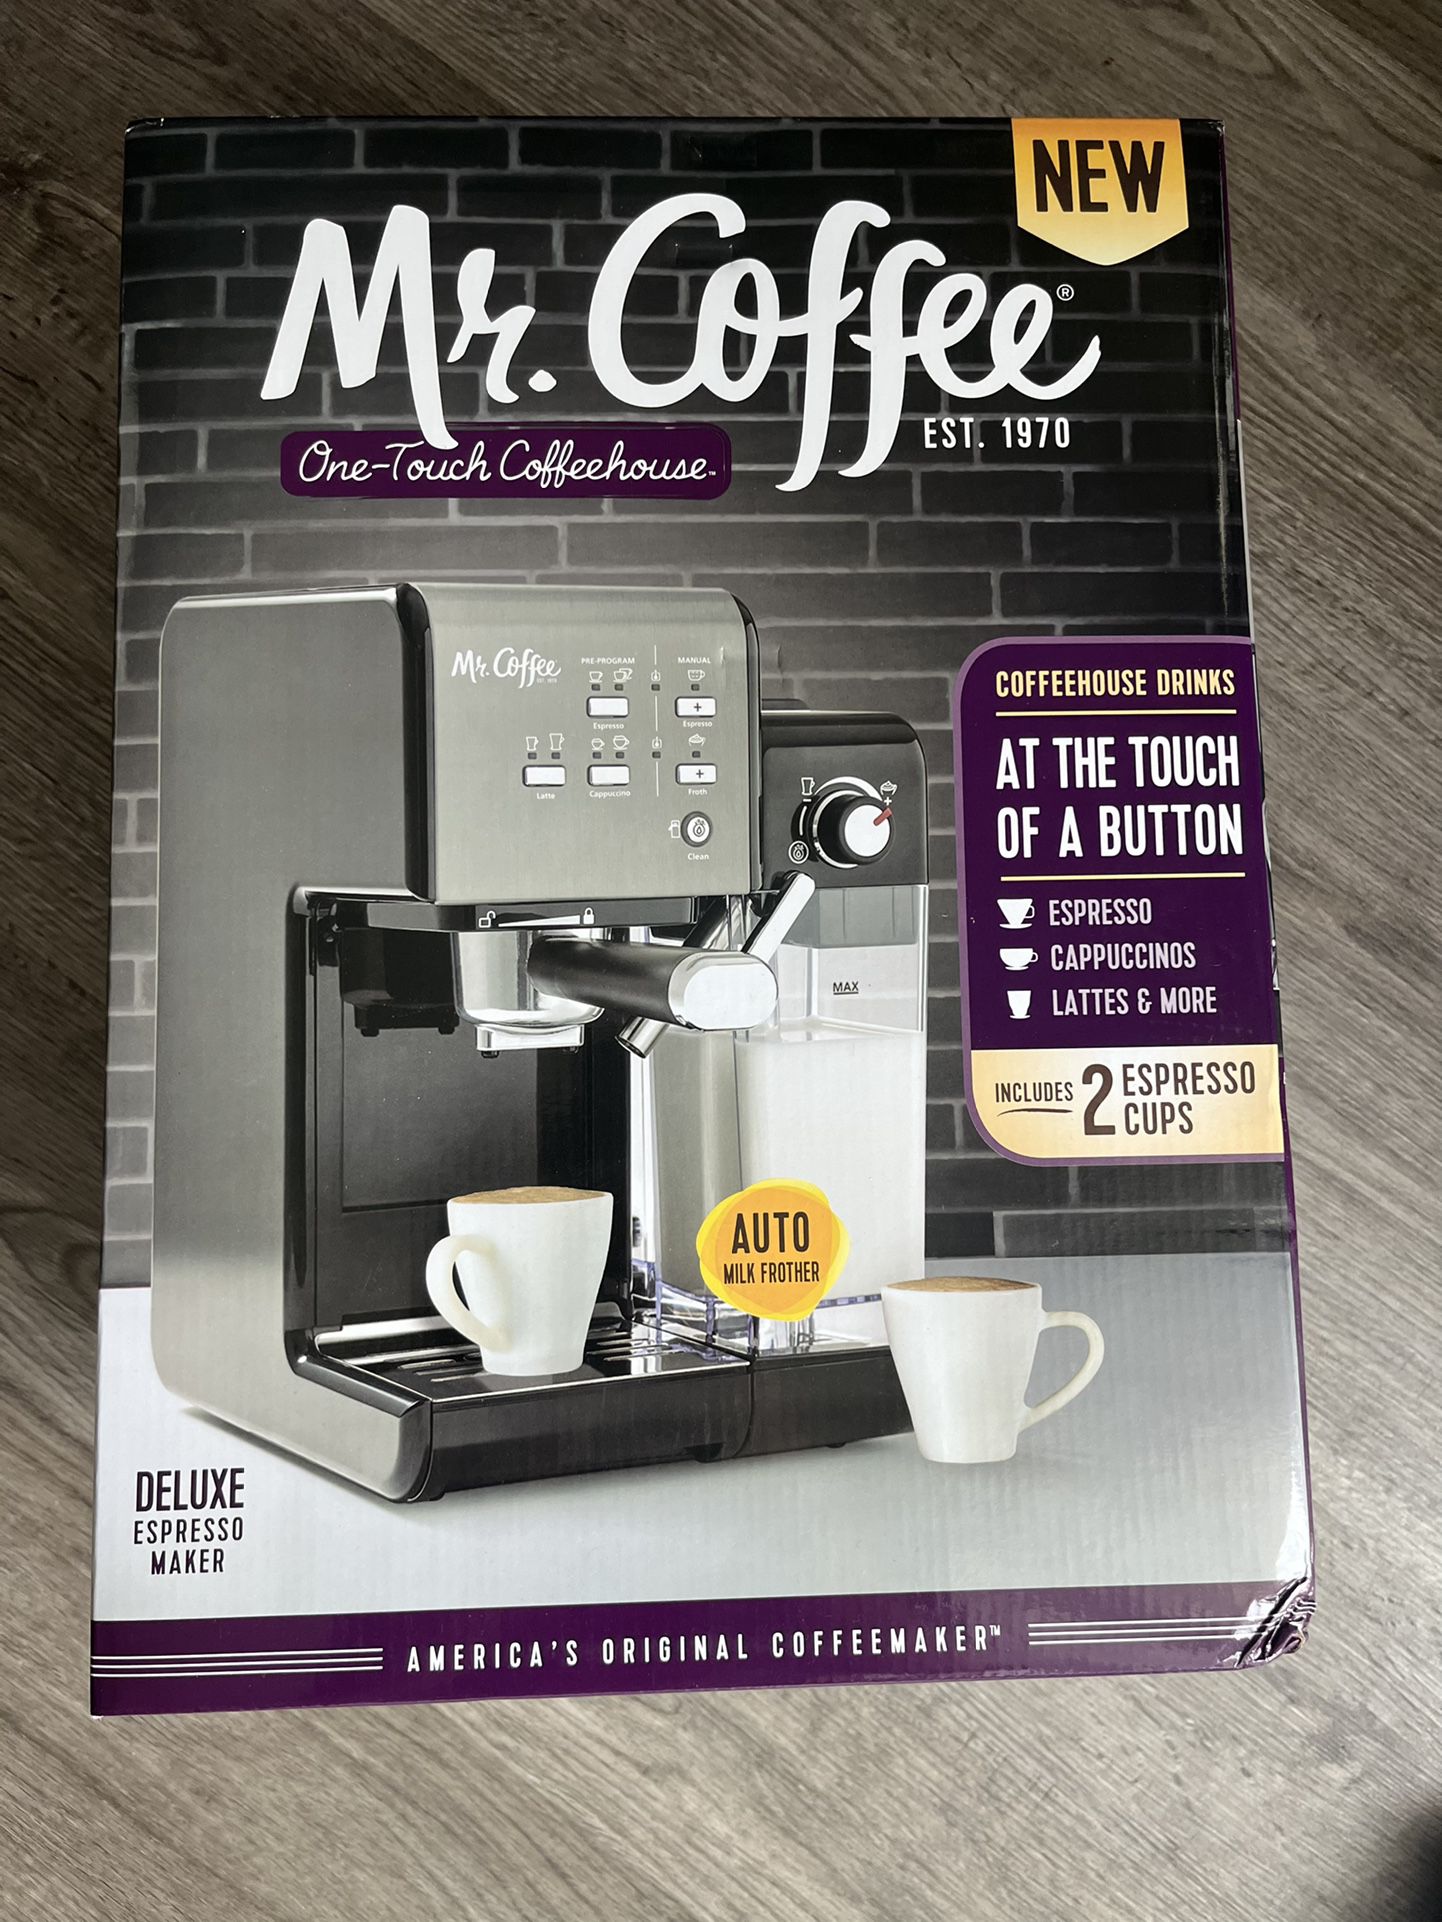 Mr. Coffee New One-Touch CoffeeHouse Espresso, Cappuccino, and